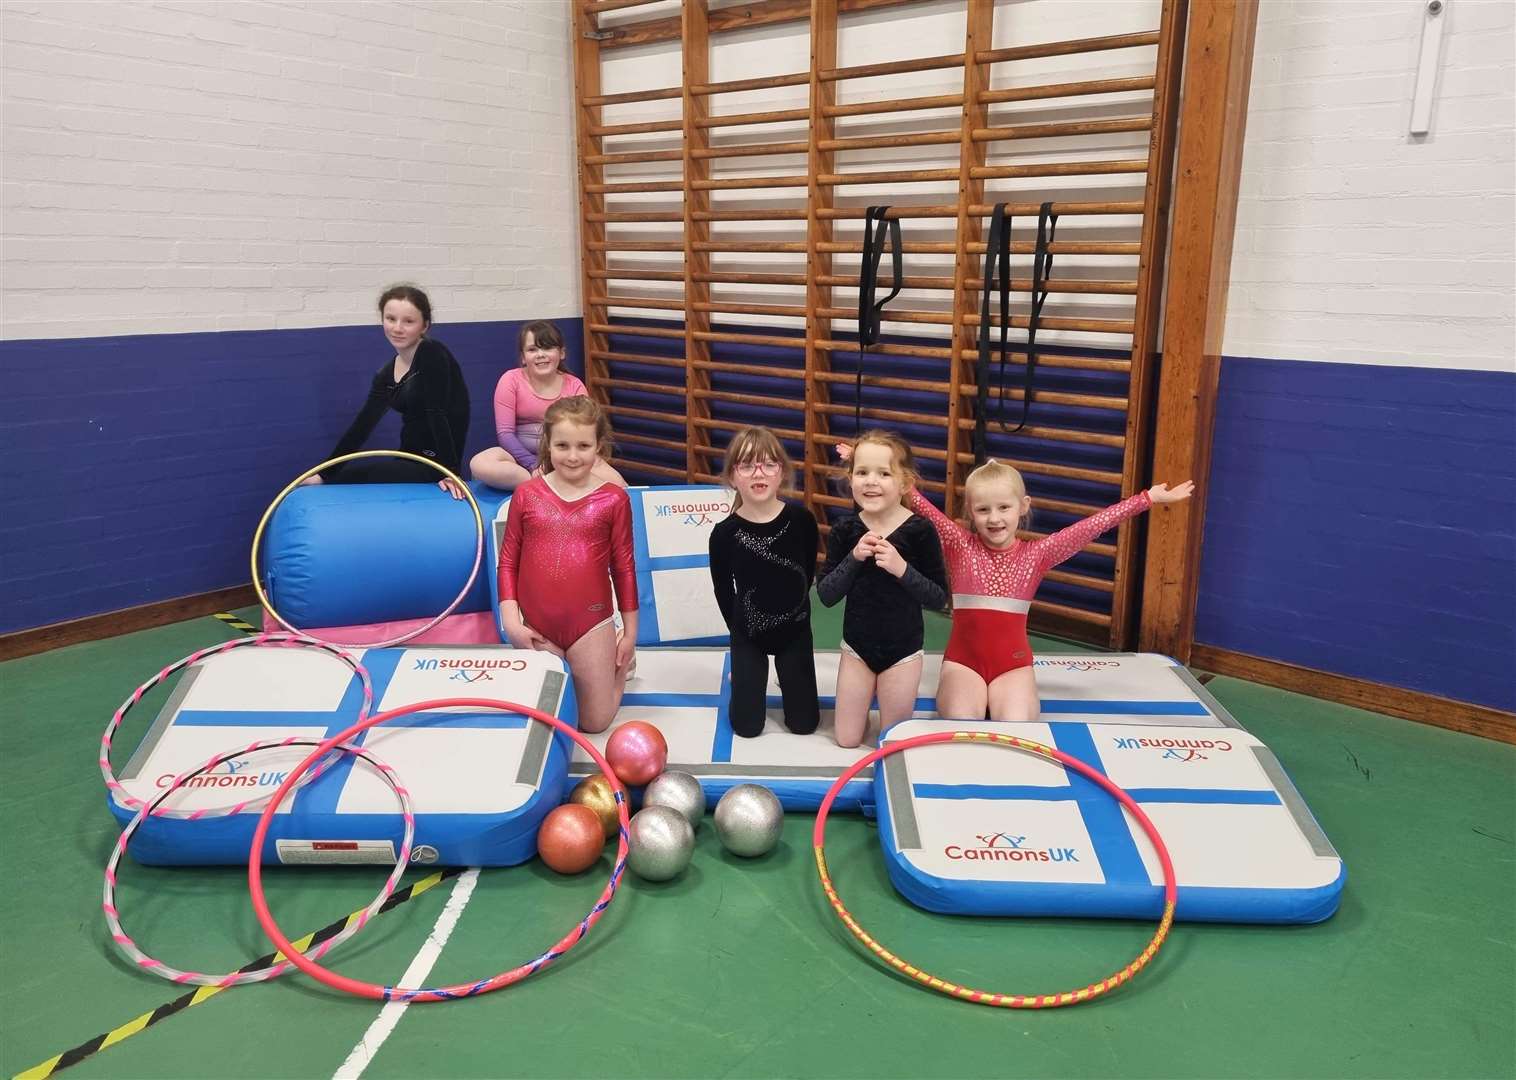 Some of Caithness Gymnastics Club's rhythmic gymnasts with the new equipment purchased after local fundraising and support from Tesco.